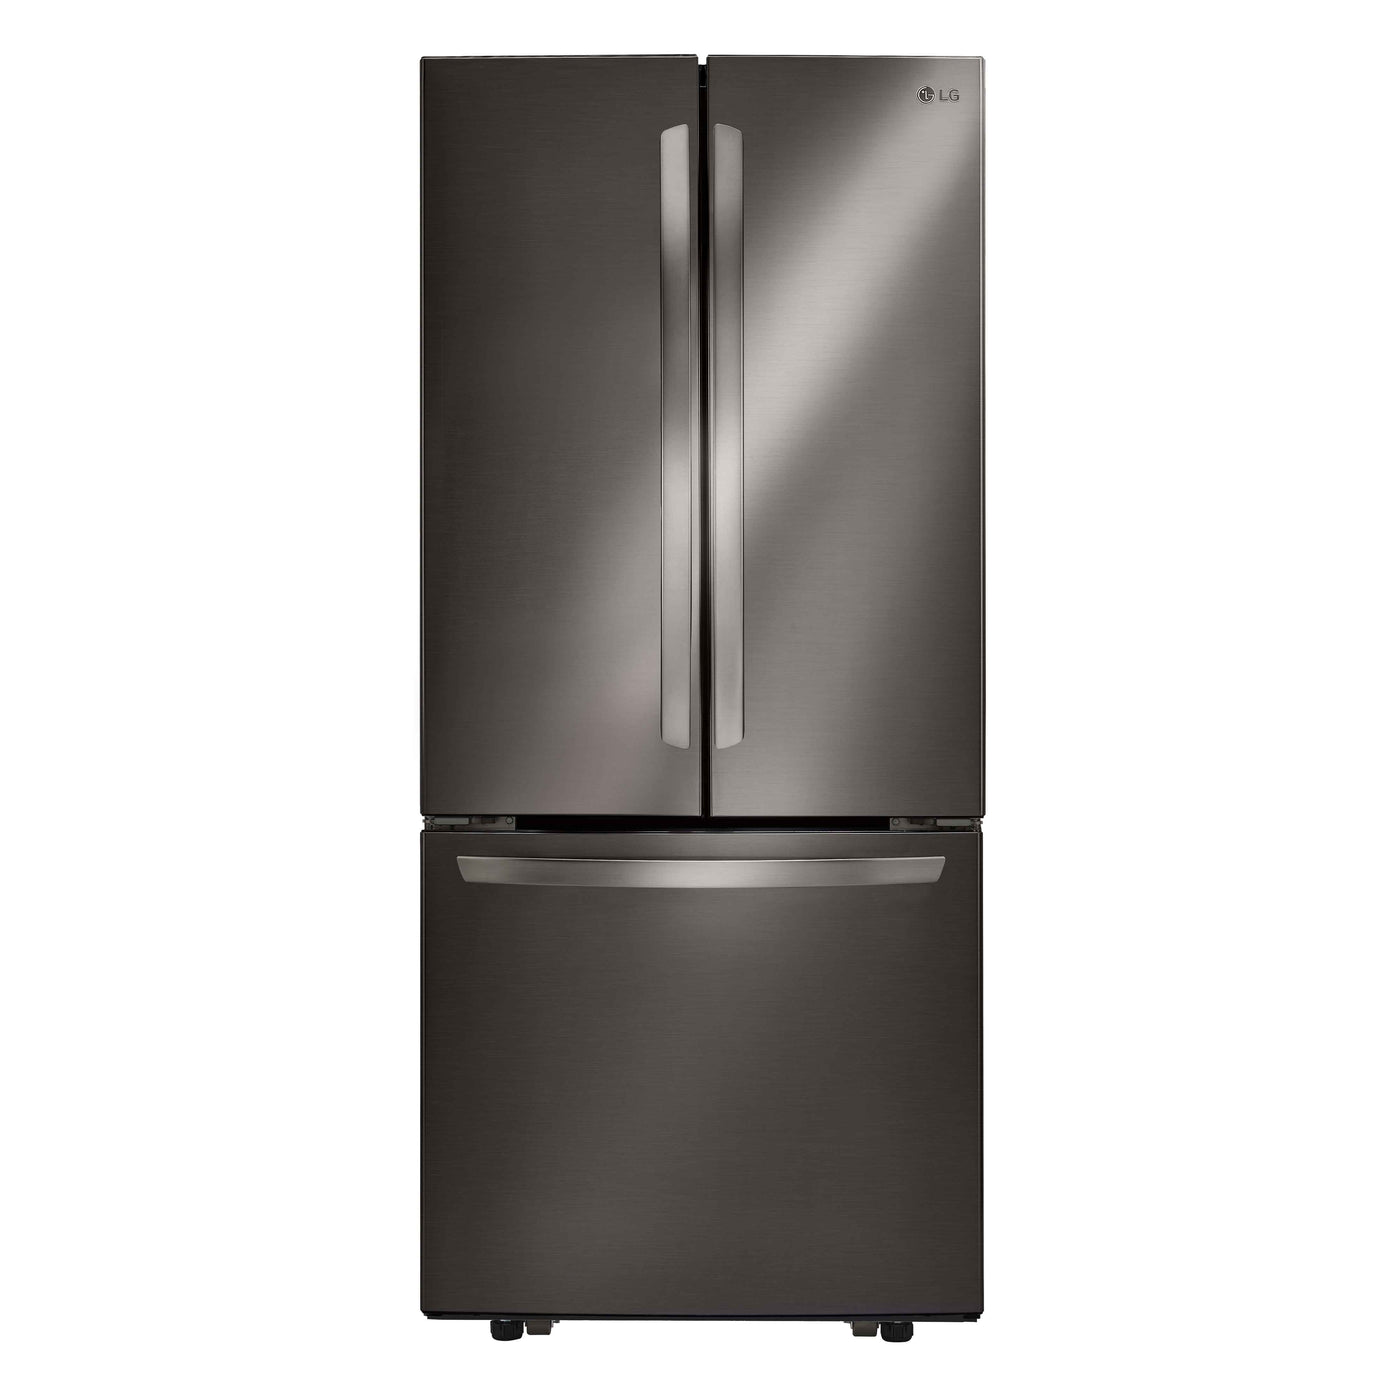 LG 30" Black Stainless Steel French Door Refrigerator (22 cu. ft.) - LRFNS2200D